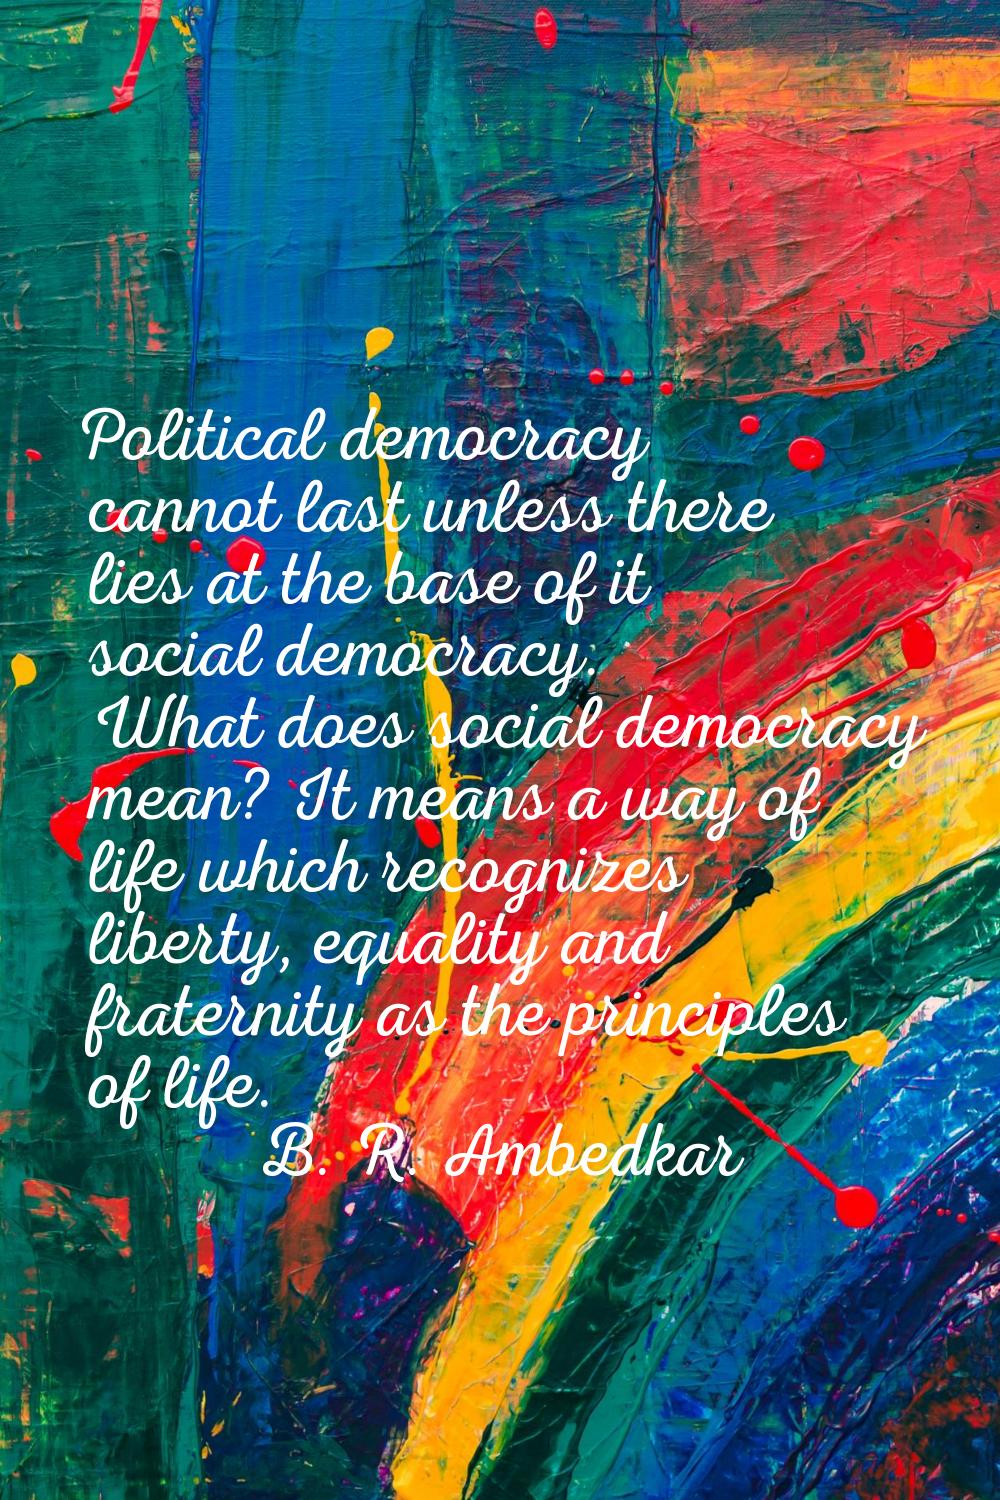 Political democracy cannot last unless there lies at the base of it social democracy. What does soc